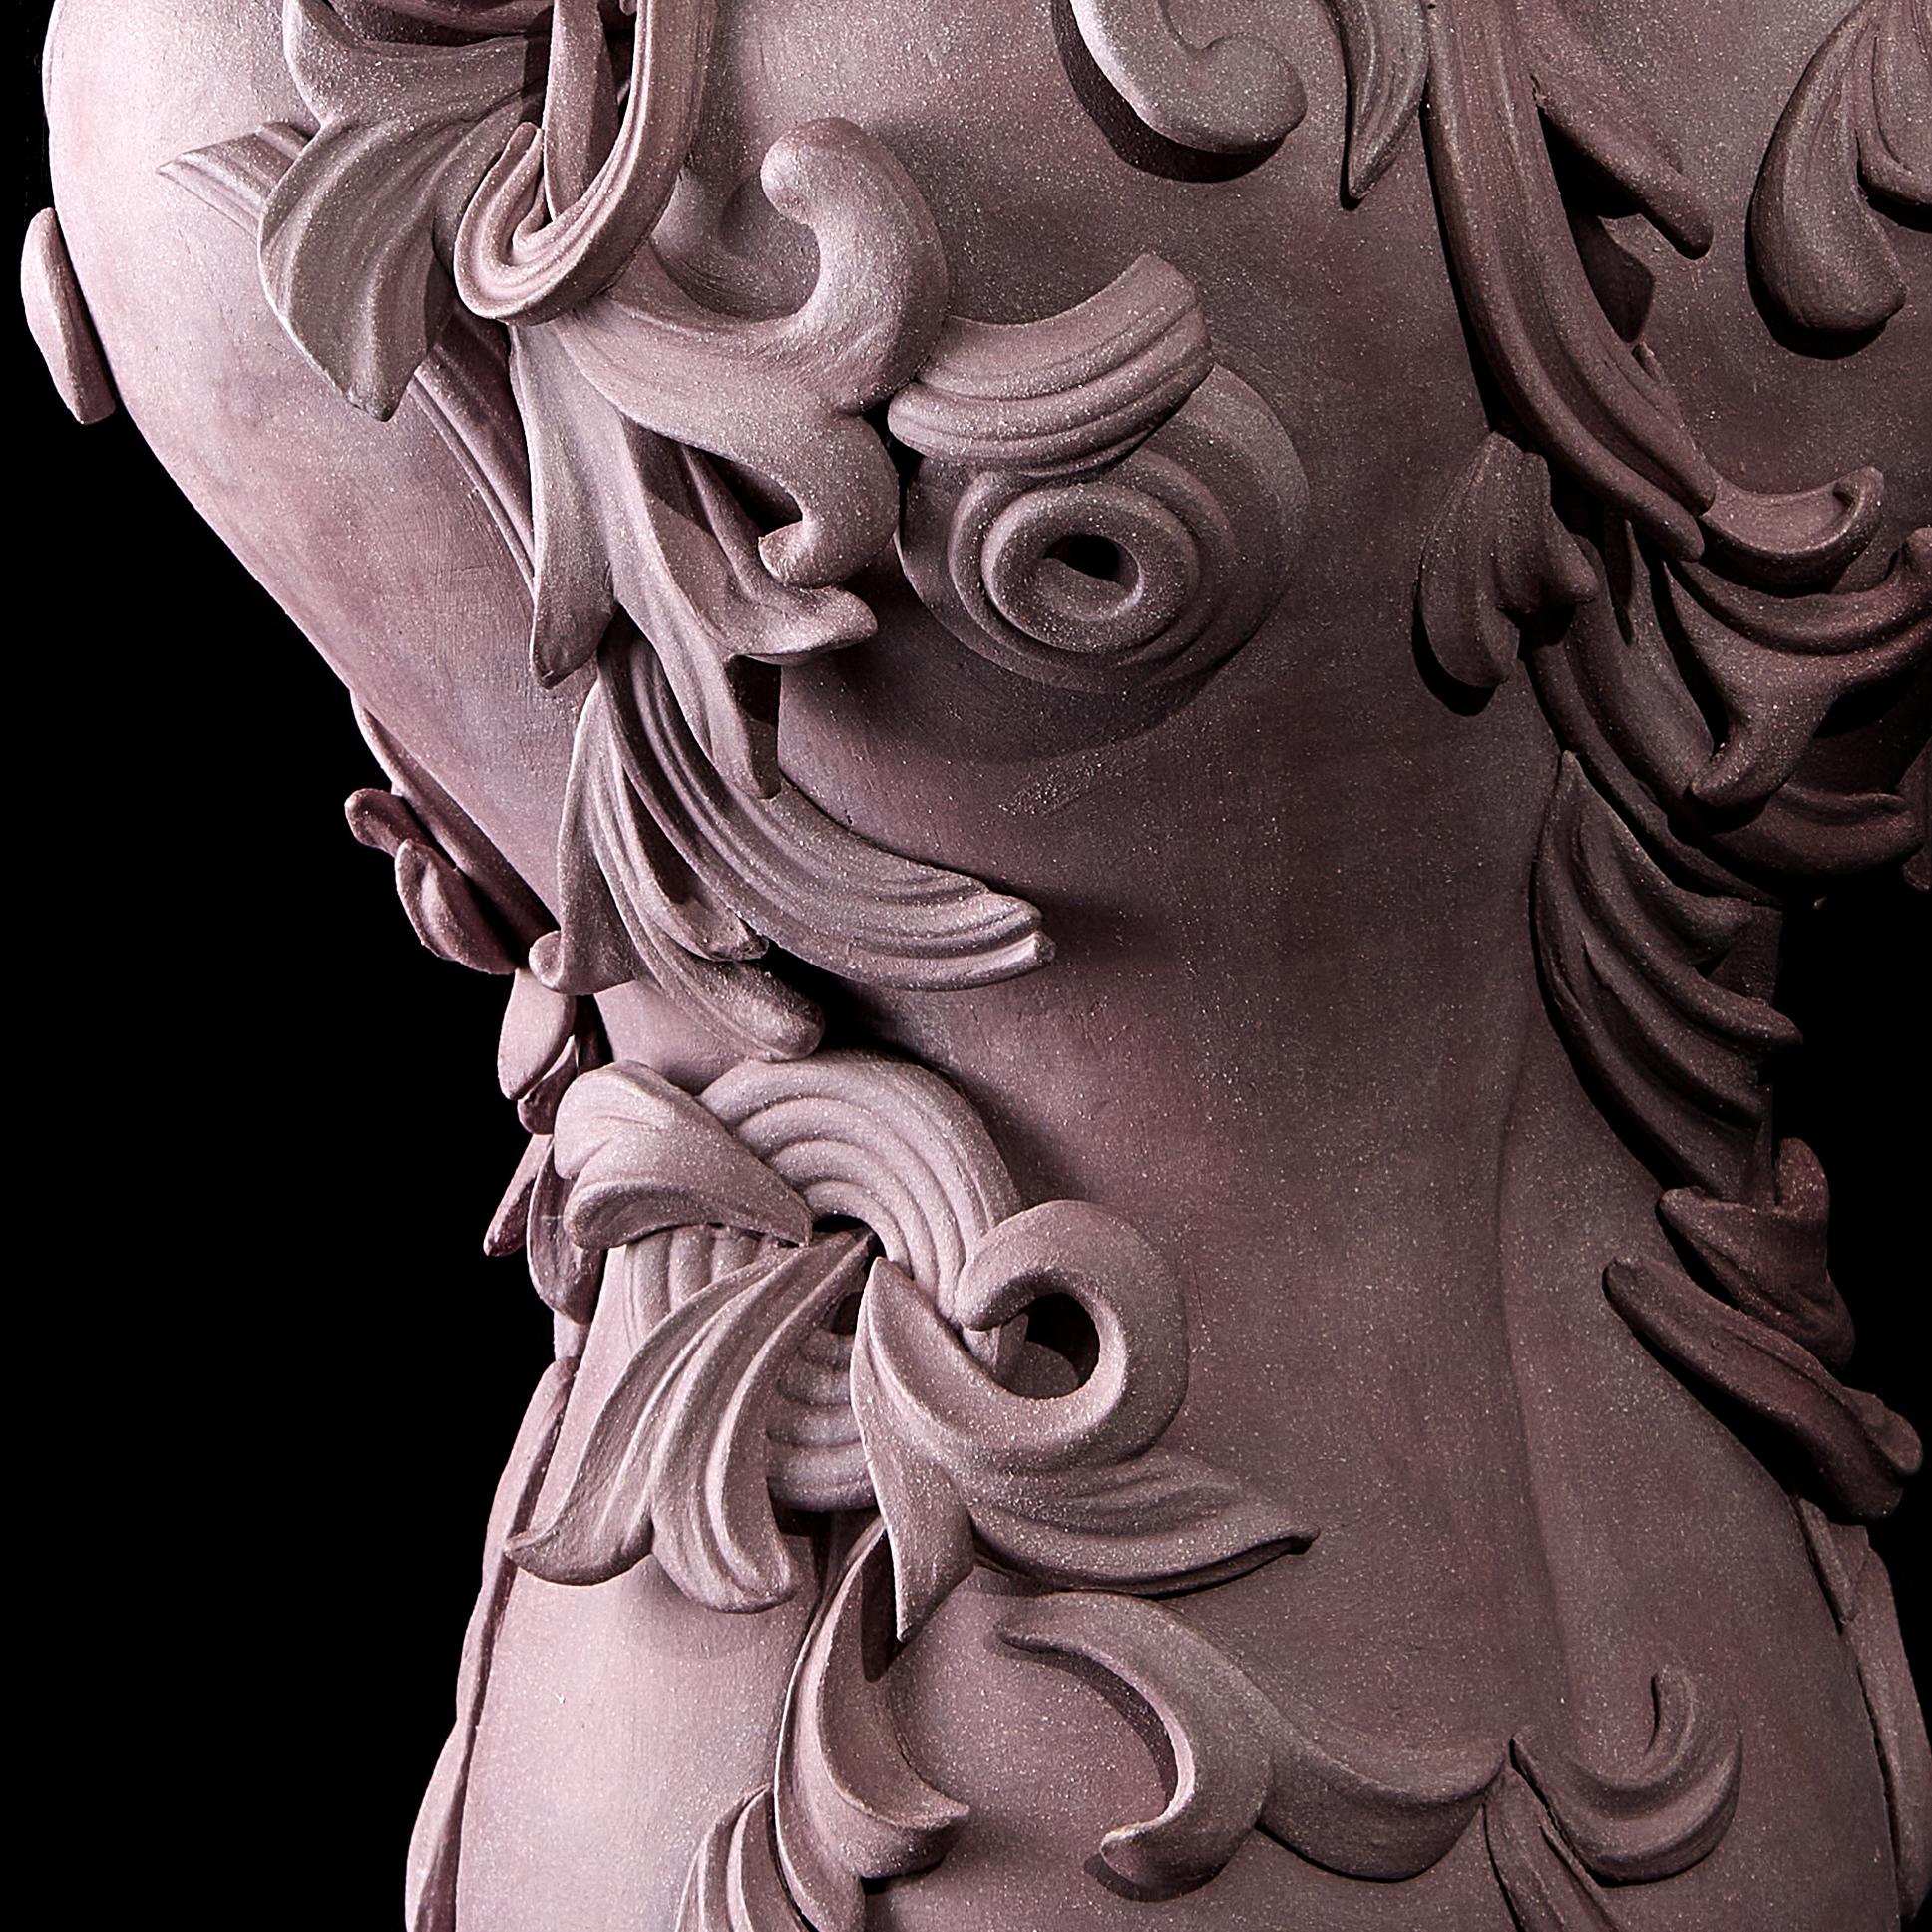 Hand-Crafted Vari Capitelli VIII, a Unique Ceramic Vase in Dusky Damson and Plum by Jo Taylor